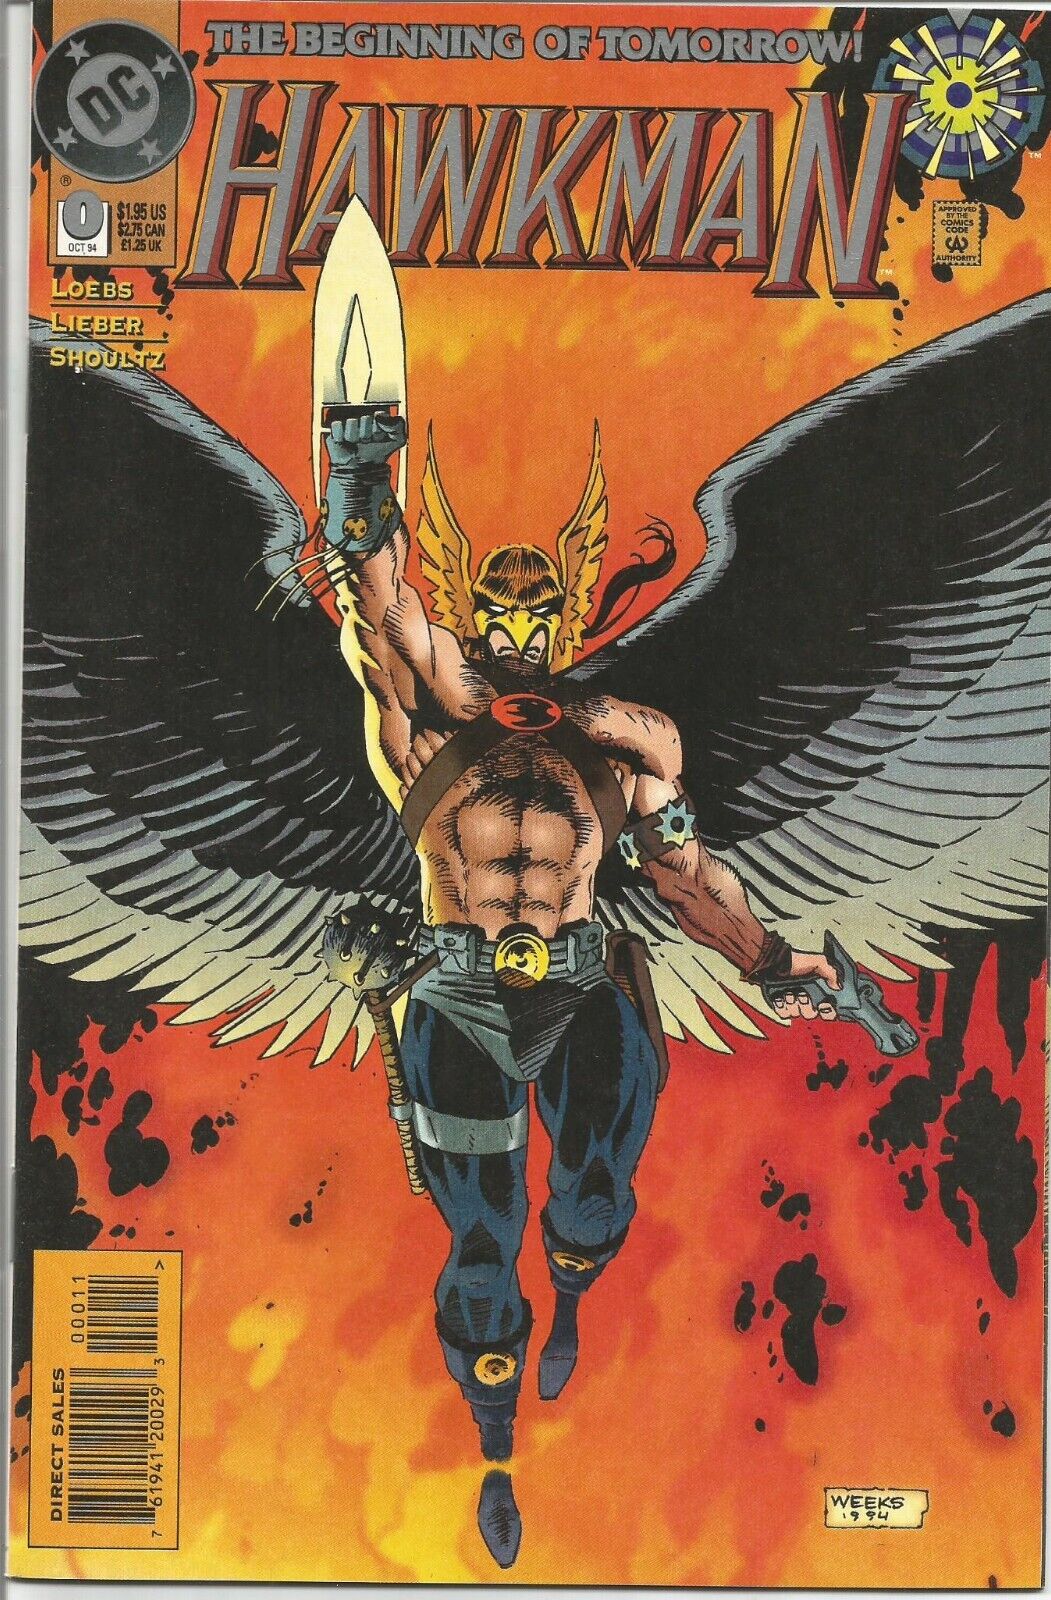 Hawkman #0 DC Comics 1994 Direct Edition VF/NM Sleeve and Board